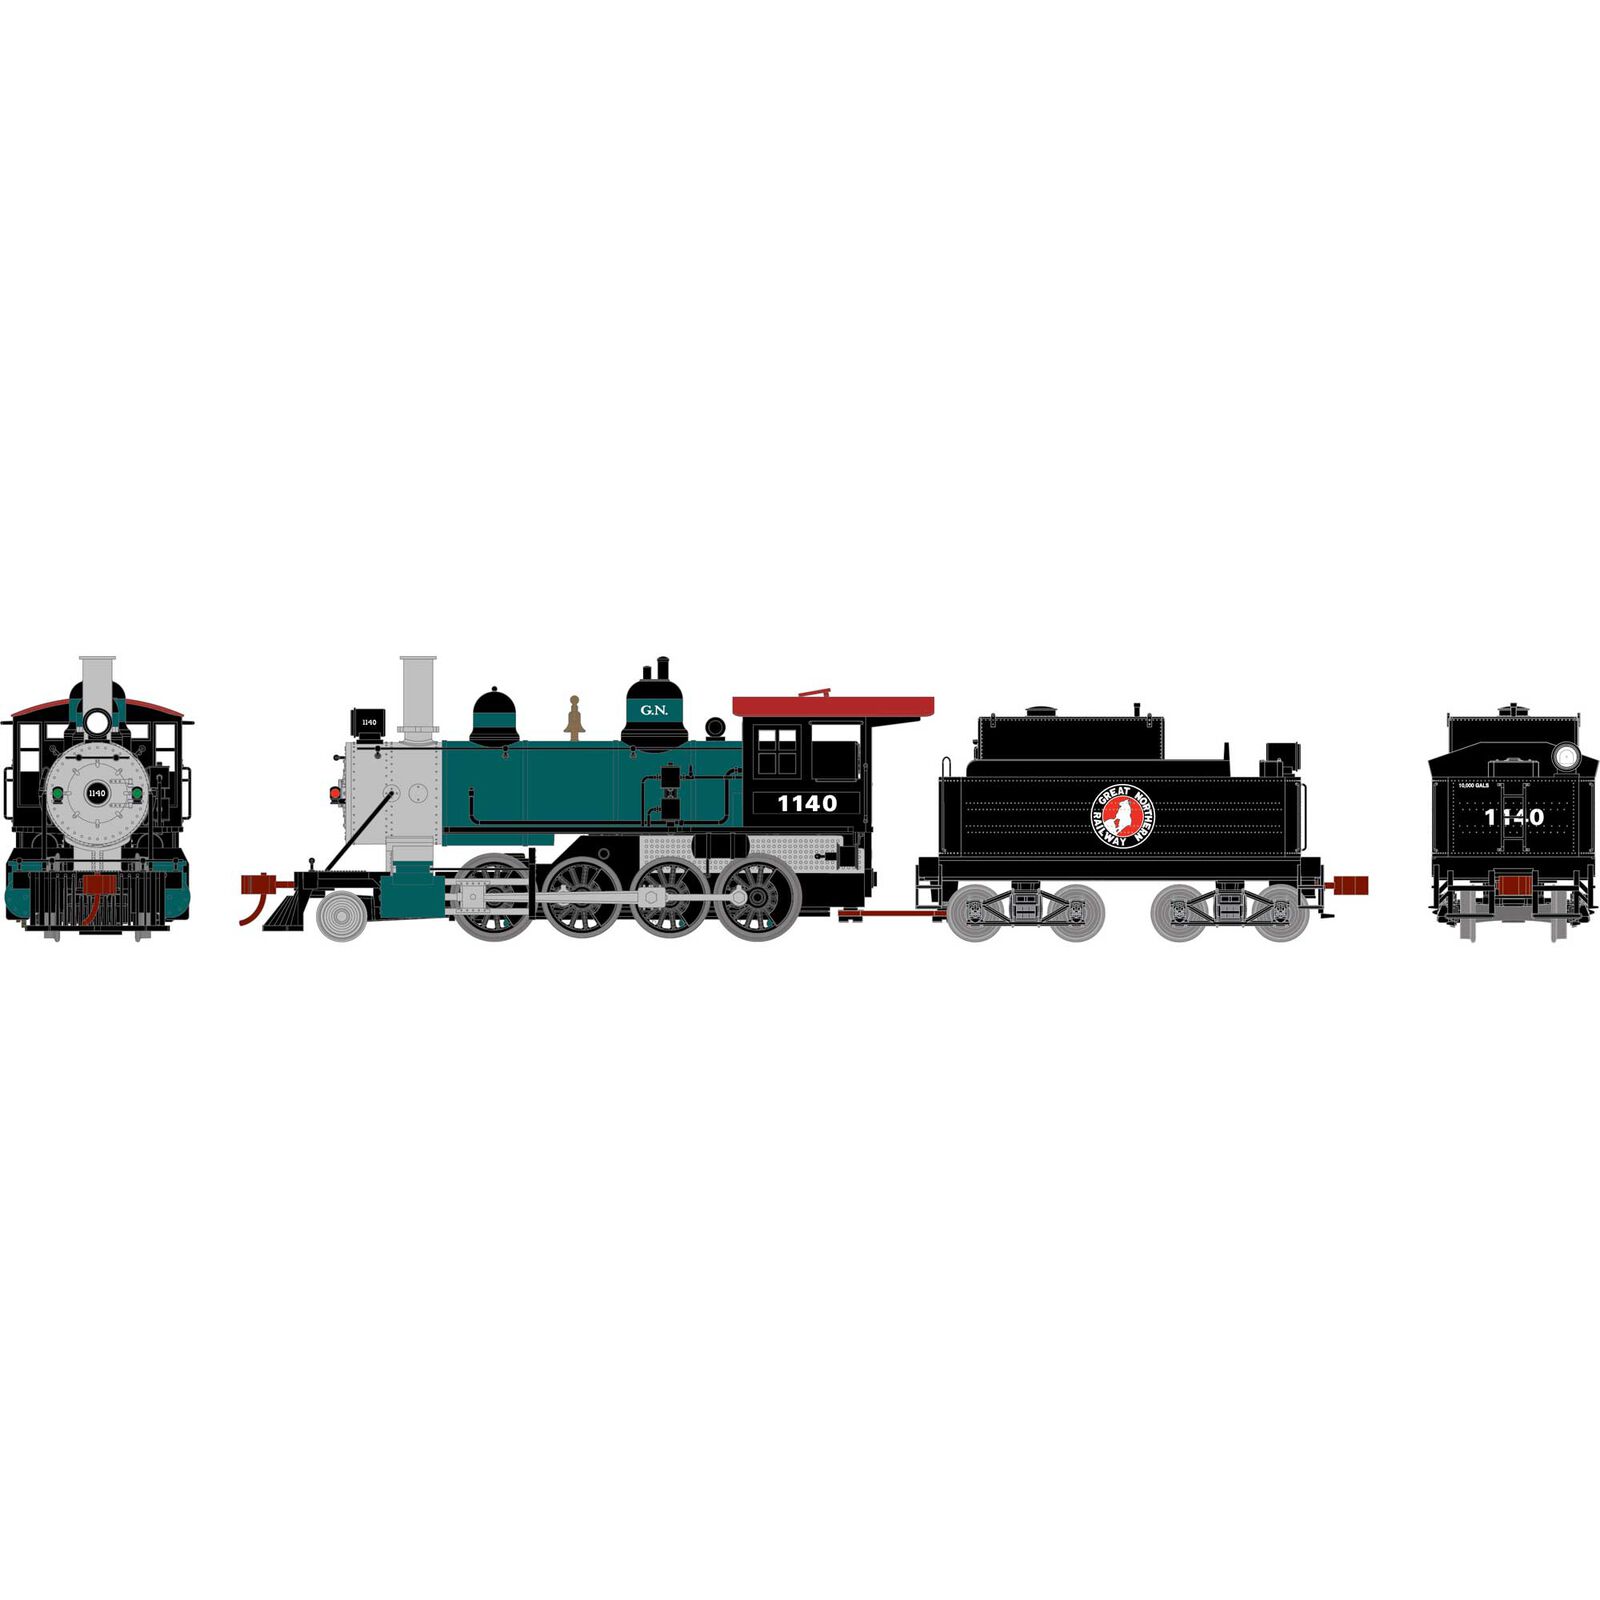 HO Old Time 2-8-0 Locomotive with DCC & Sound, GN #1140